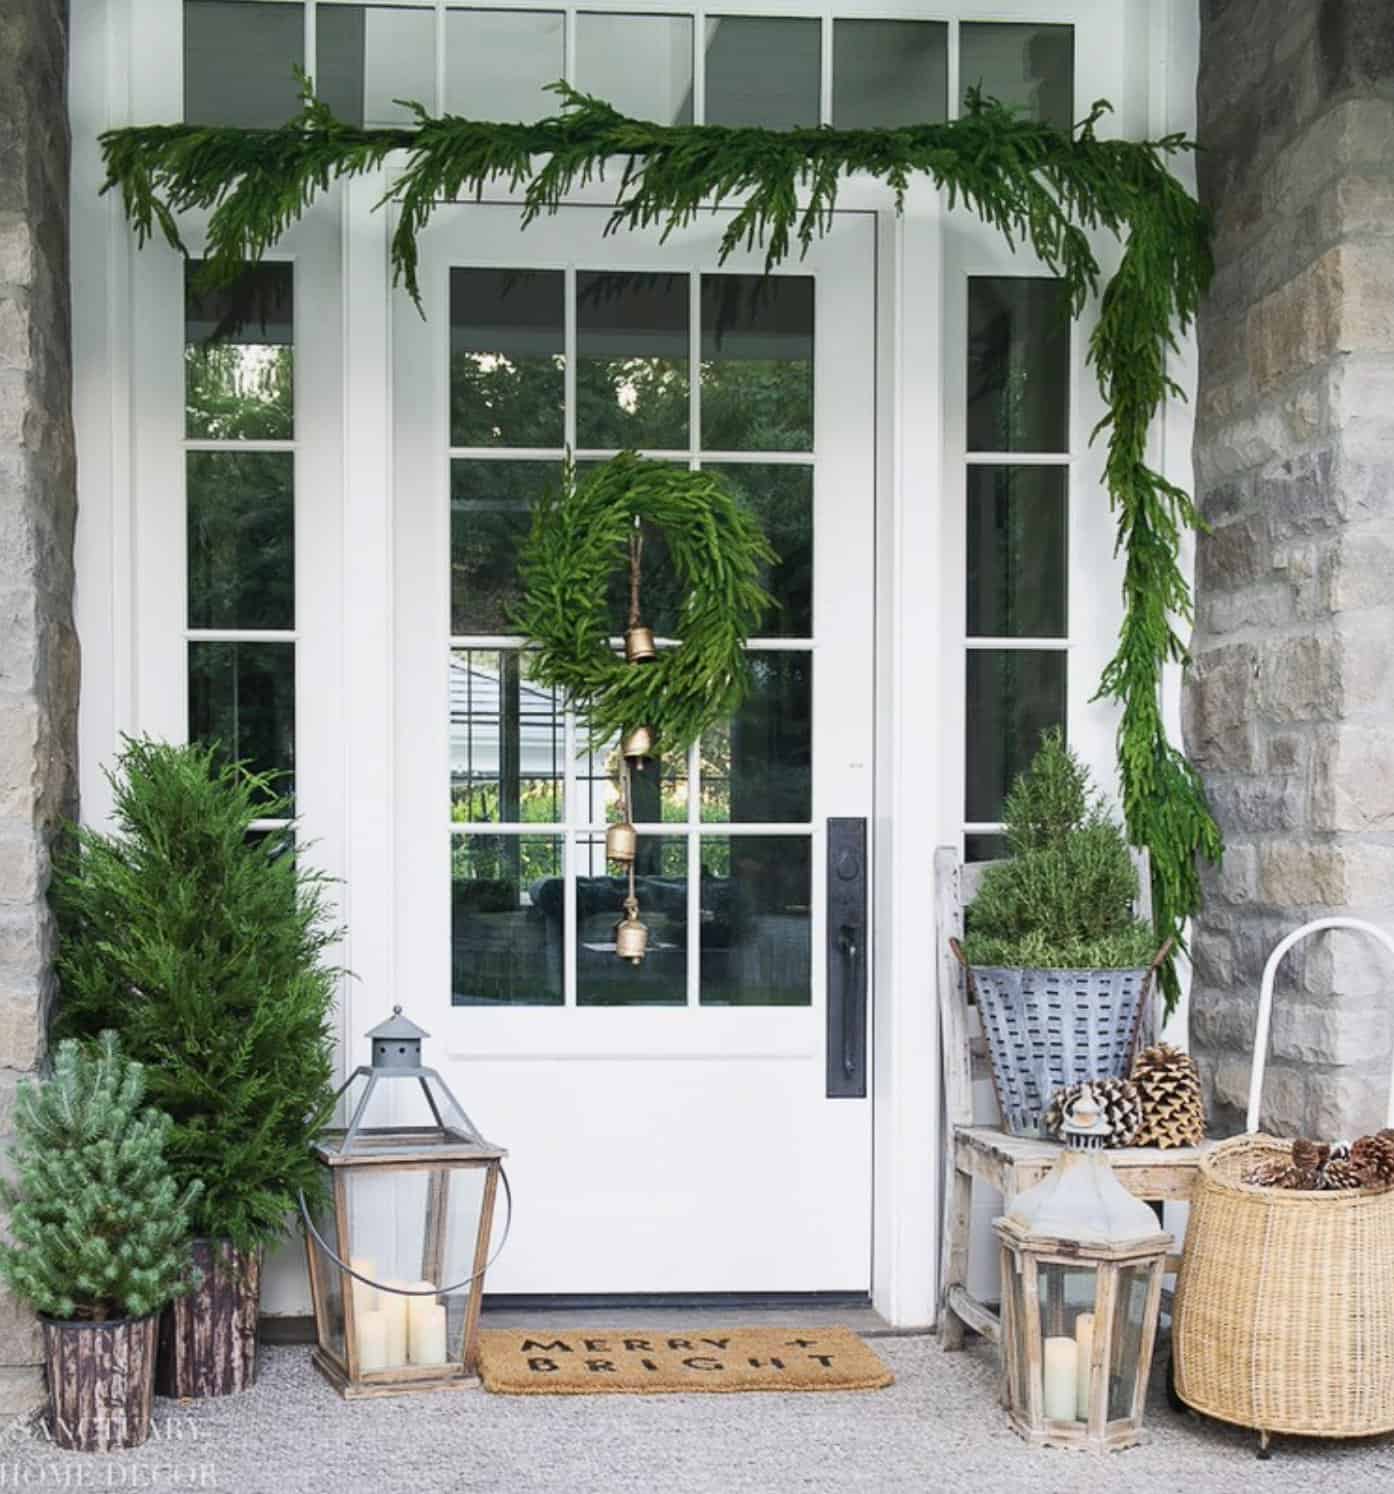 beautifully-decorated-front-porch-with-garland-a-wreath-and-trees